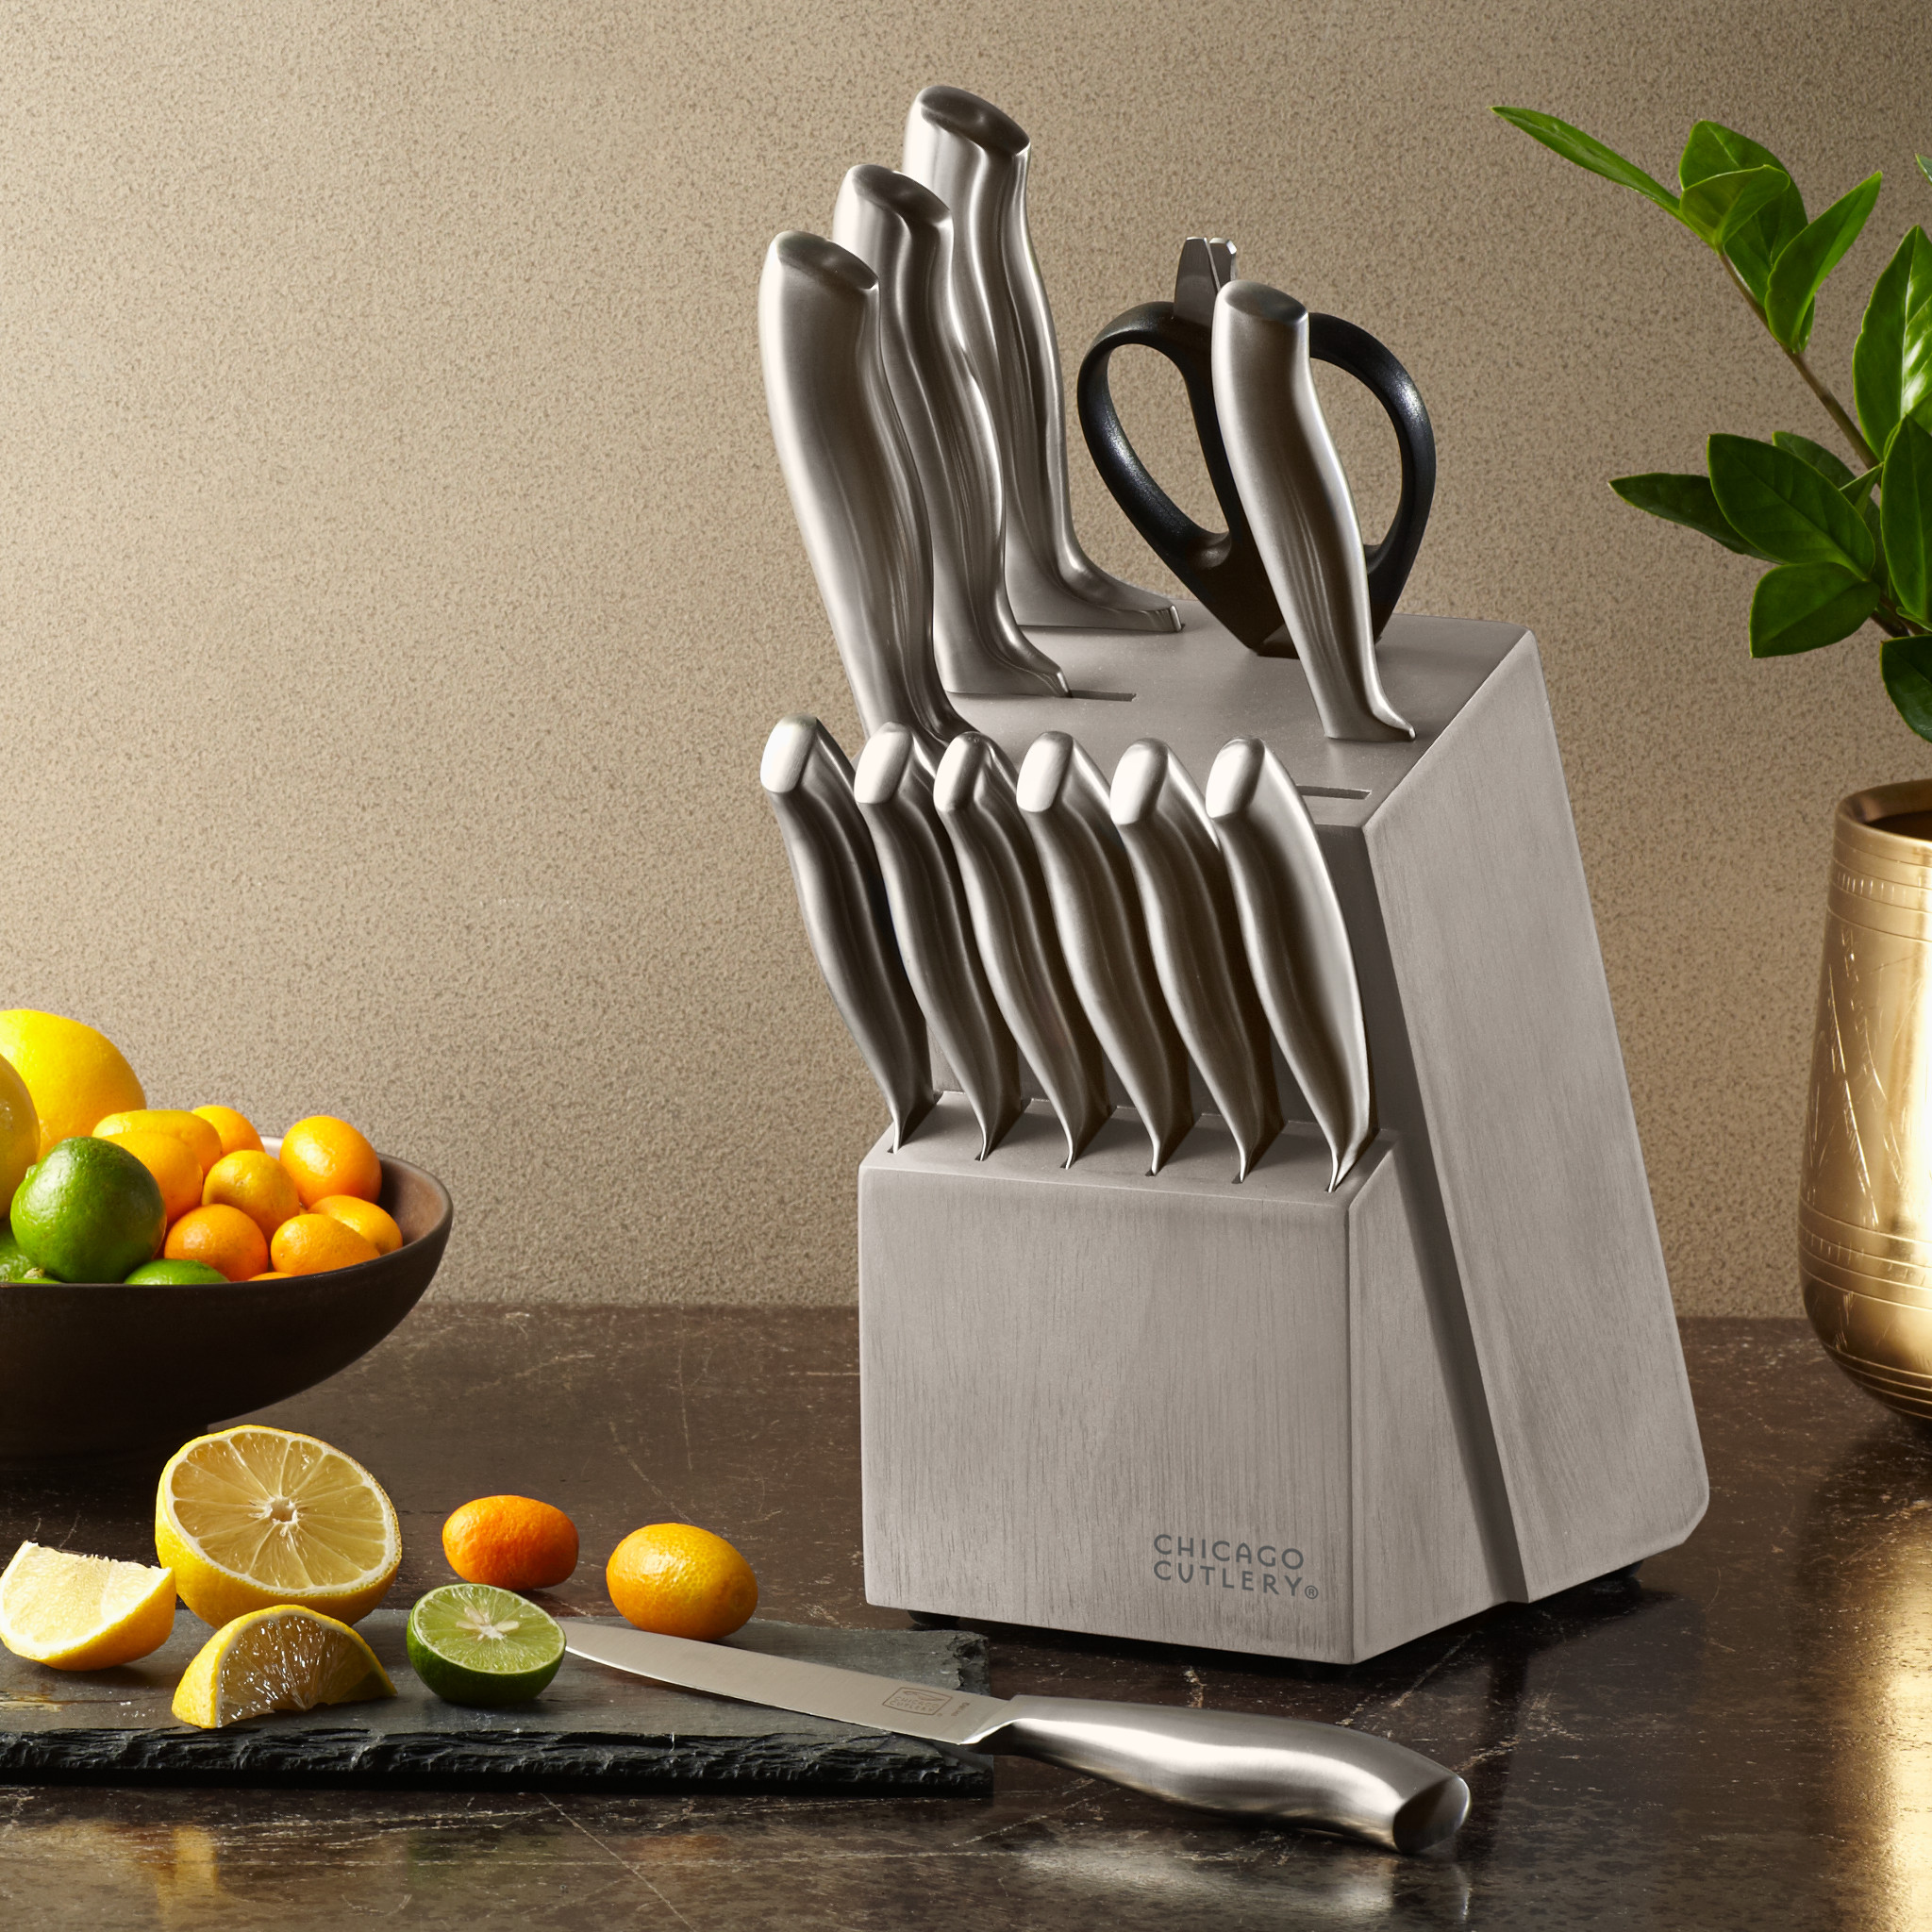 https://embed.widencdn.net/img/worldkitchen/u7oi8wnv5l/2048px/1135027_CC_Cutlery_Lifestyle_Square_Insignia-Steel_13-Piece-Set_1.png